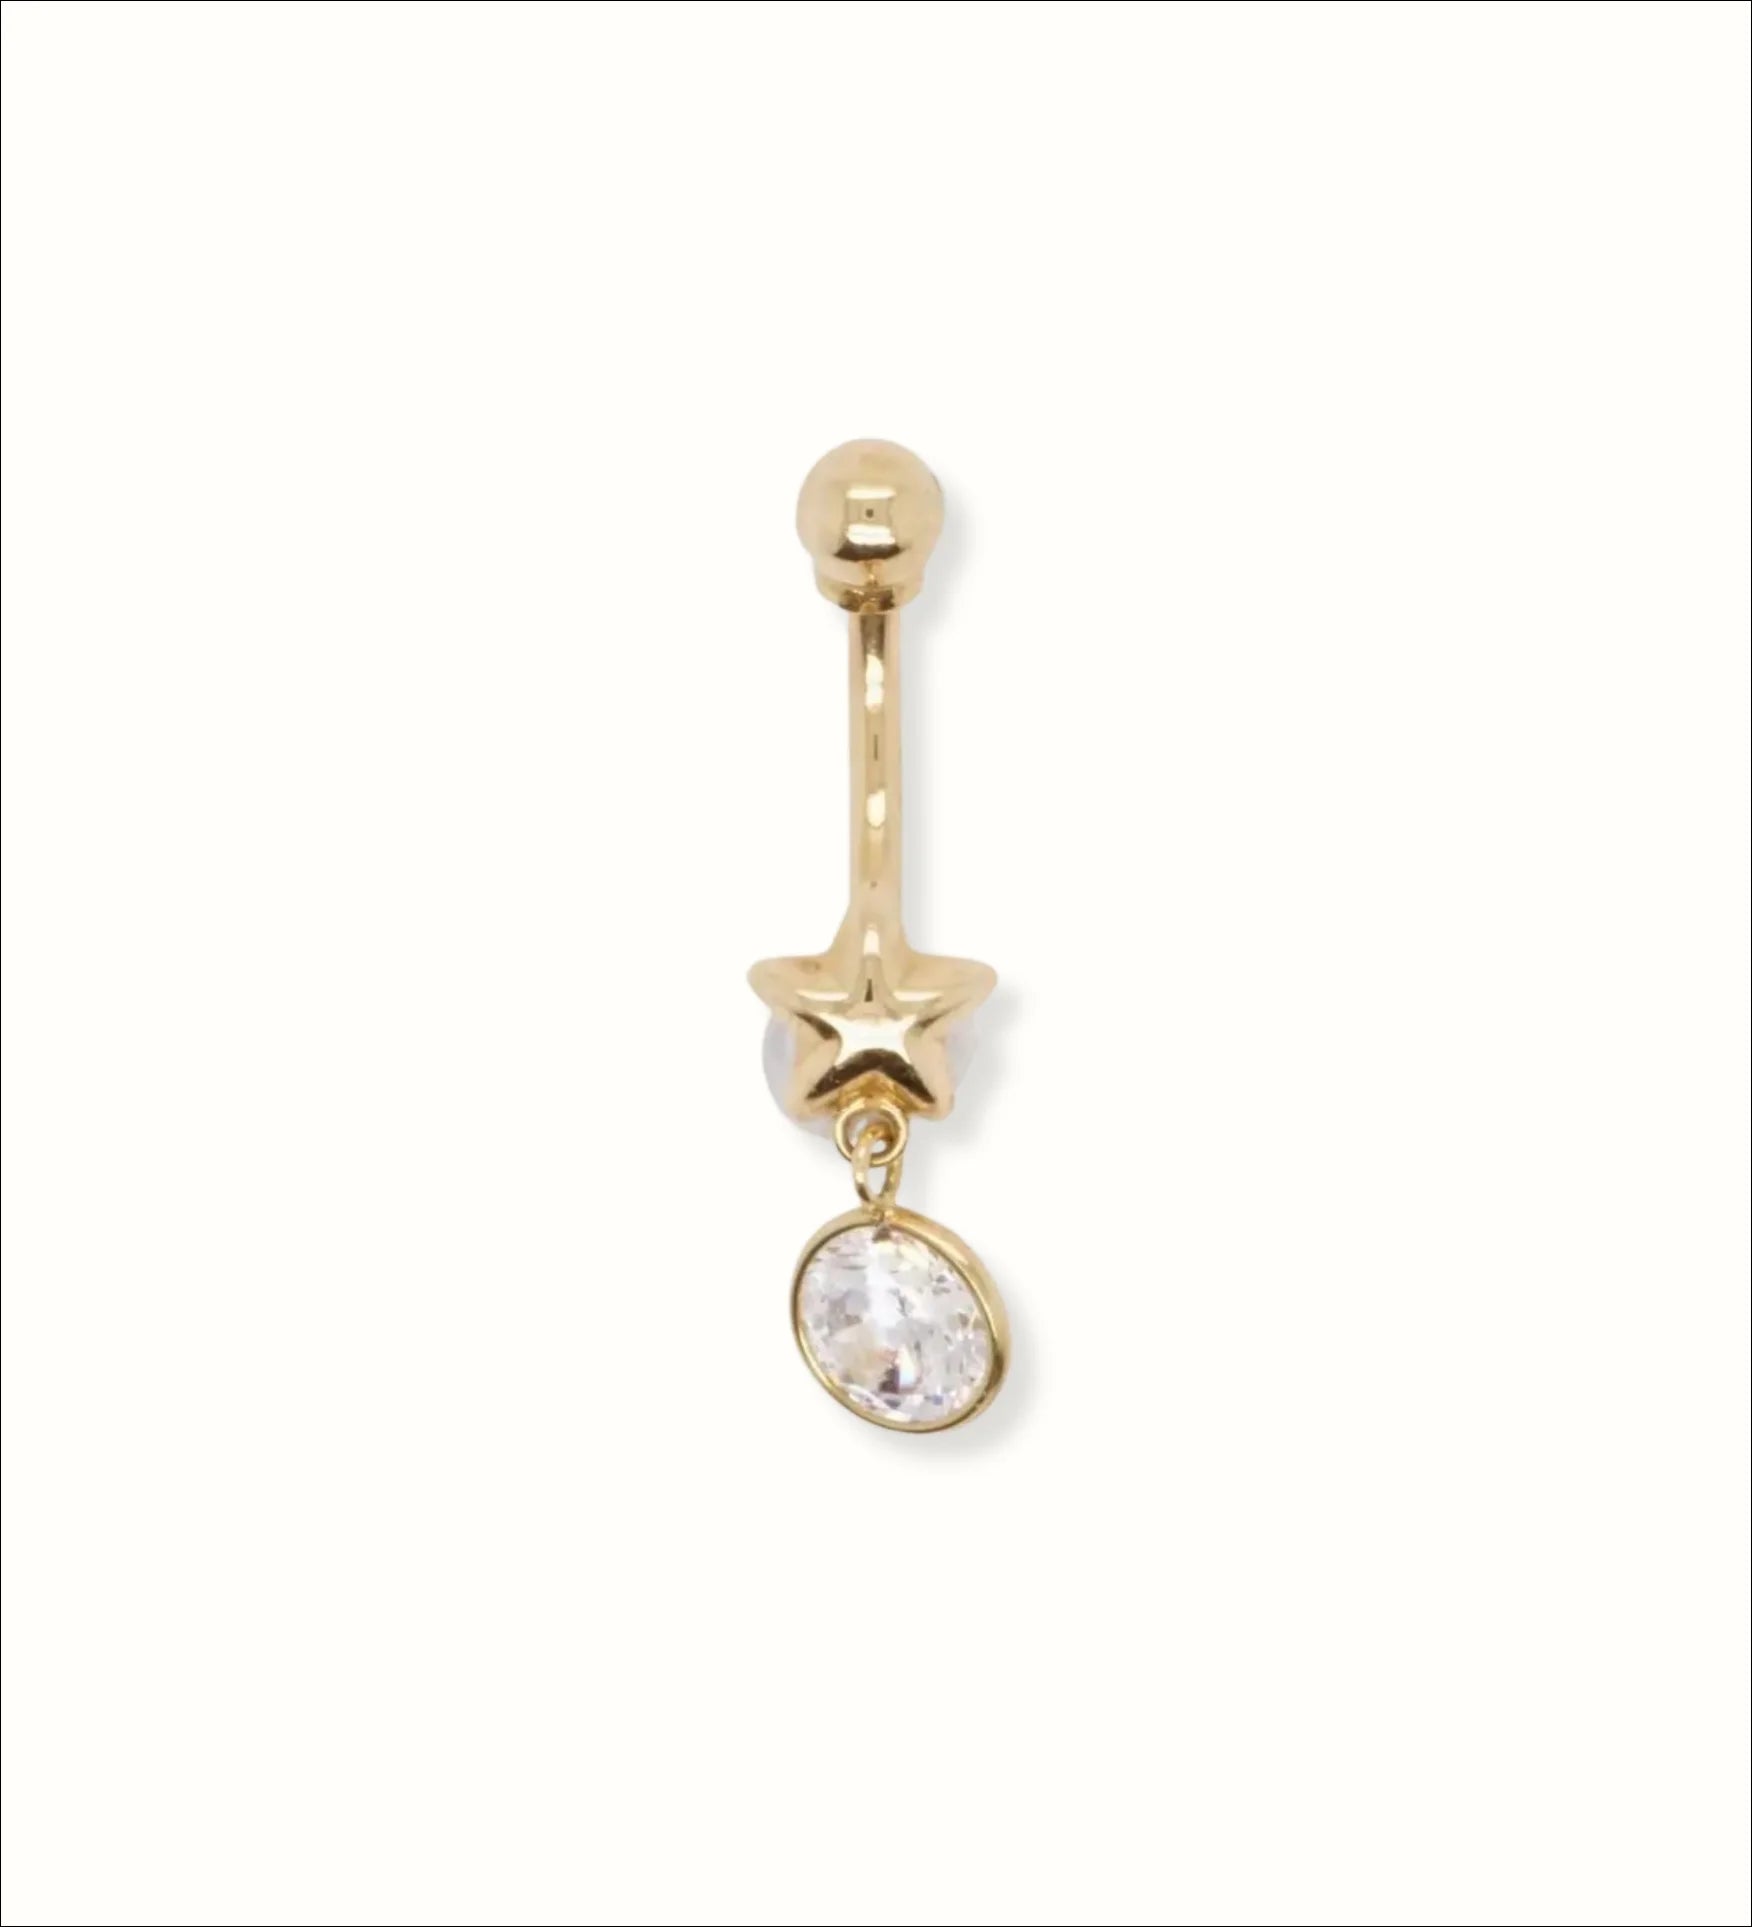 Art Gold 18k Bellybutton Piercing with Cubic Zirconia